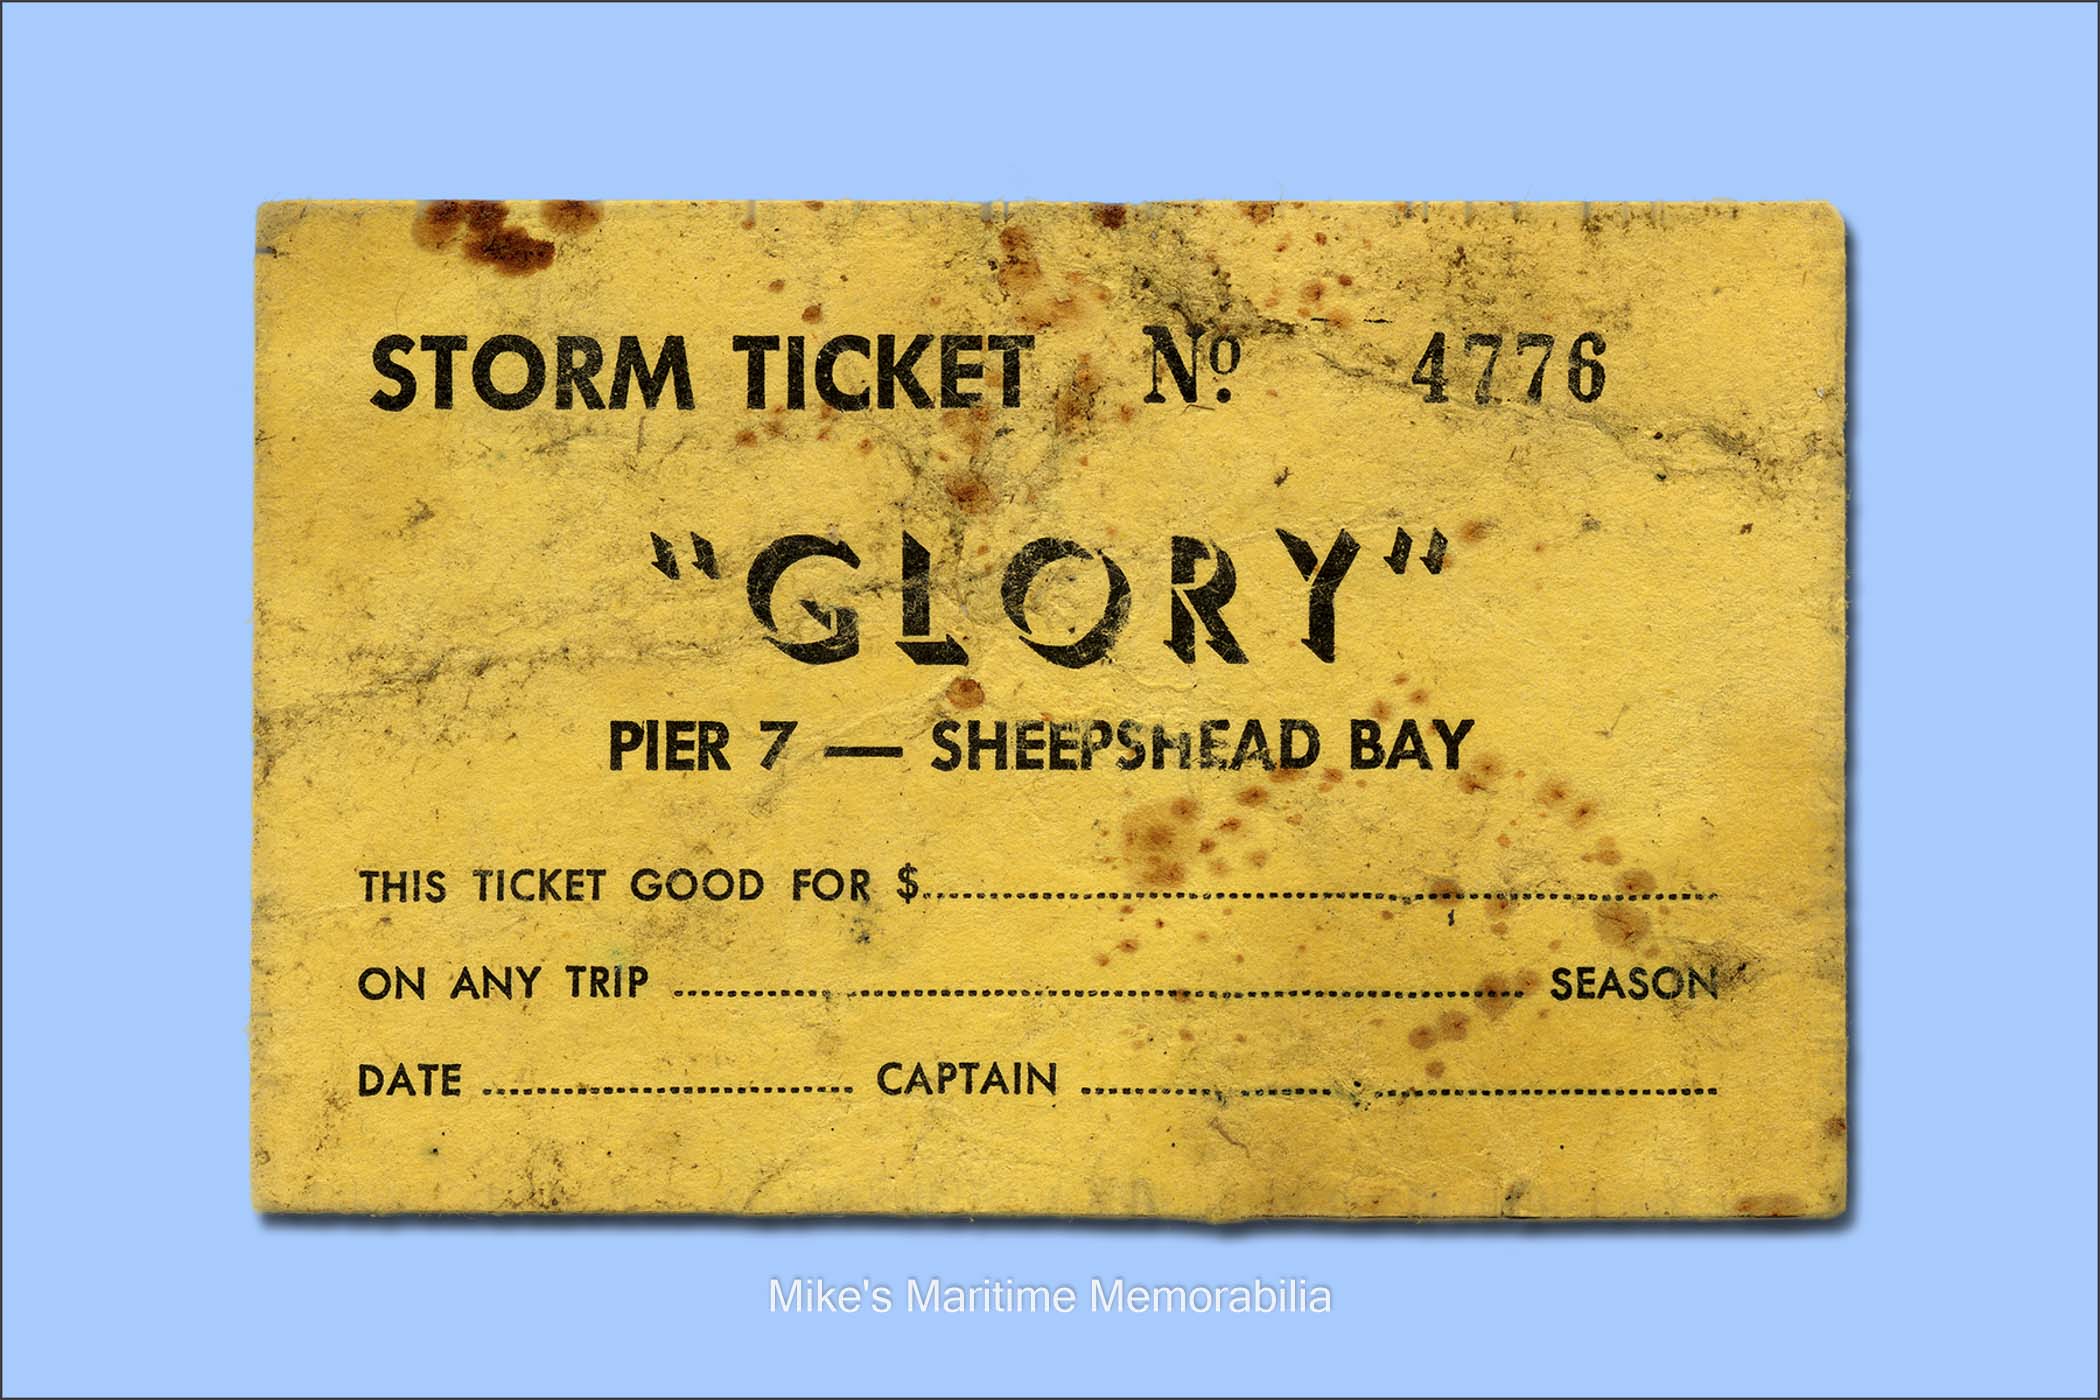 GLORY Storm Ticket, Sea Bright, NJ – 1975 Ned Lloyd, a resident of Sea Bright, NJ at the time, recovered this storm ticket from the wreck of Captain John D. O'Leary's "GLORY" from Sheepshead Bay, Brooklyn, NY. The 105-foot "GLORY" ran aground on a foggy night in May 1975 and broke apart fifty feet from the seawall at Normandie Beach in Sea Bright, NJ. Ned recovered this storm ticket from among the debris along the sea wall and kept it for over thirty years, and after discovering the history of the "GLORY" on this site, sent us this great piece of history. Although her foundering was the result of a failed diesel engine, it marked the conclusion of an era. The "GLORY" was the last of many converted luxury yachts that operated as party fishing boats in the New York Bight. (The "GLORY" was built in 1896 at Weymouth, MA as the steam-powered luxury yacht "INDOLENT" and began party boat fishing in 1914.) Storm tickets were handed out to passengers on party boats when fishing time was shortened because of bad weather. It is indeed ironic that one of the last pieces of memorabilia from the "GLORY" is a storm ticket.